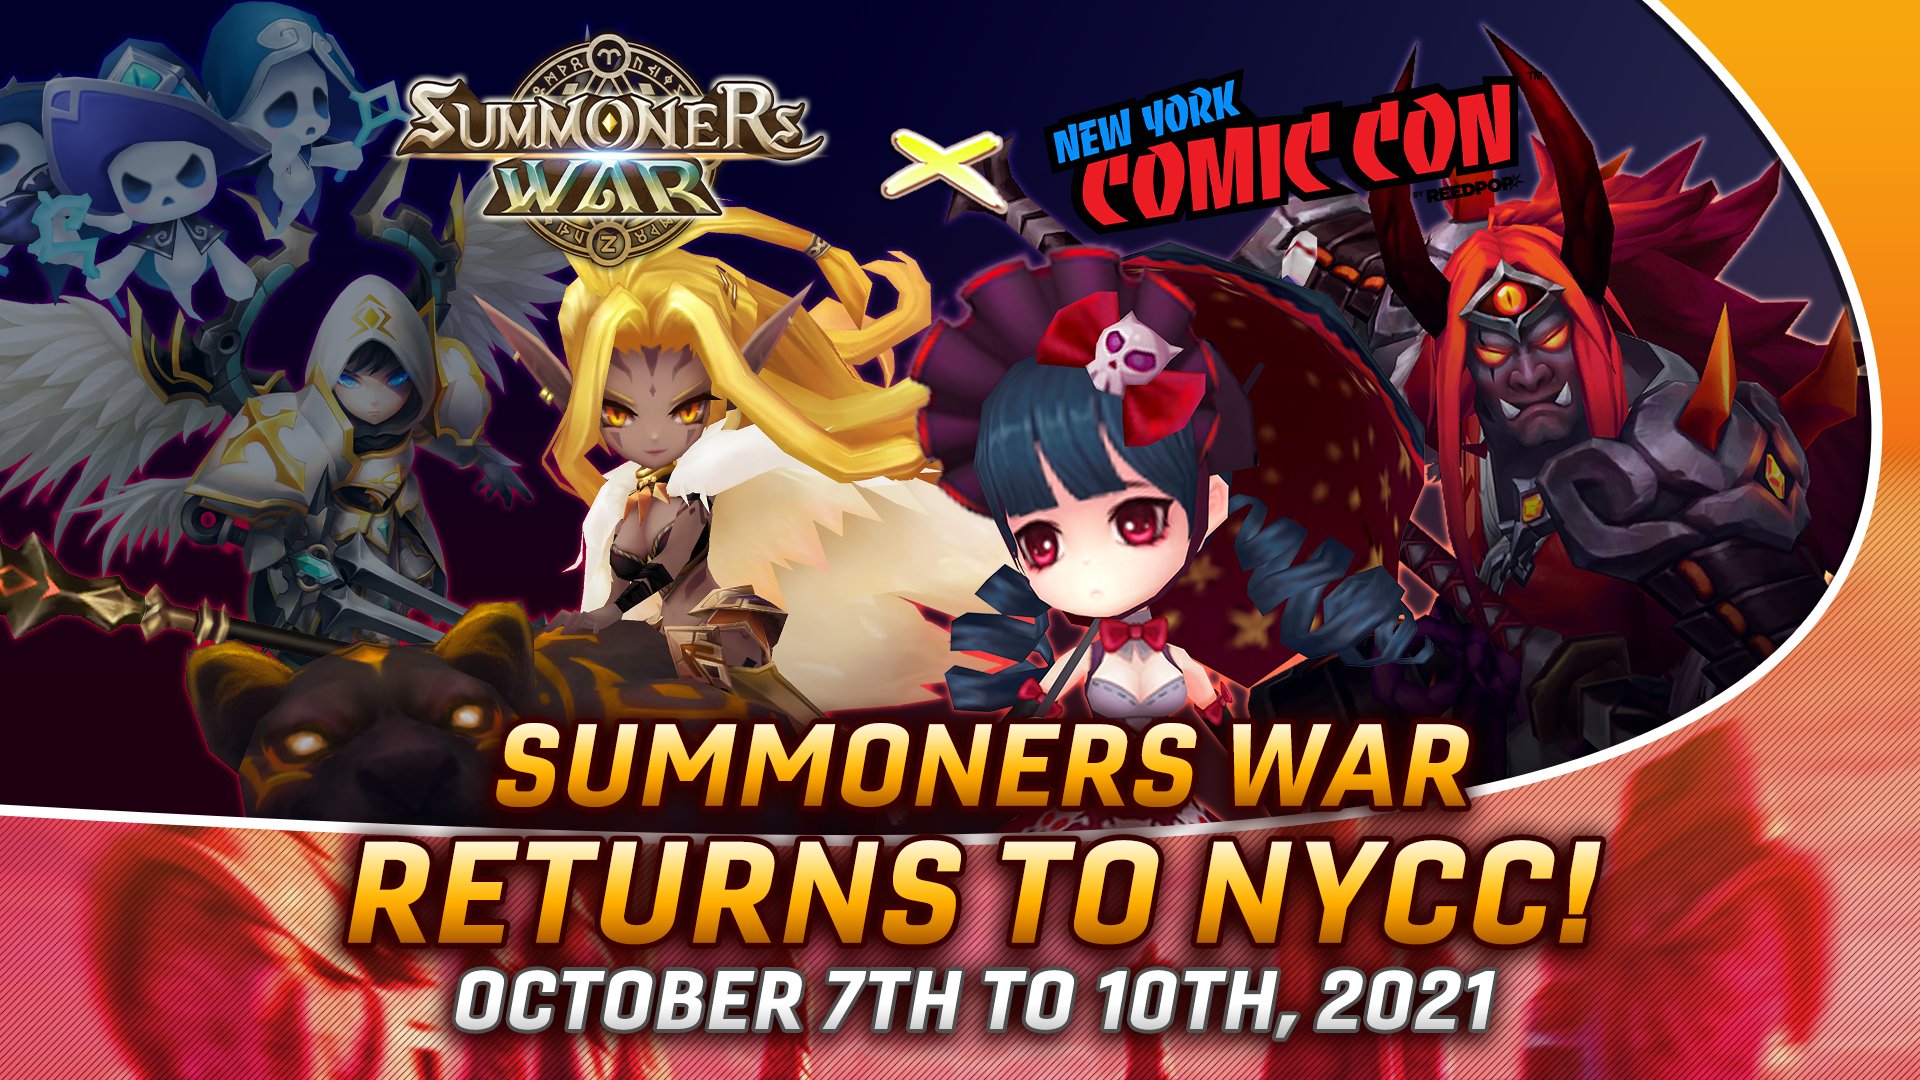 Summoners War announces New York Comic Con (NYCC) 2021 schedule PC